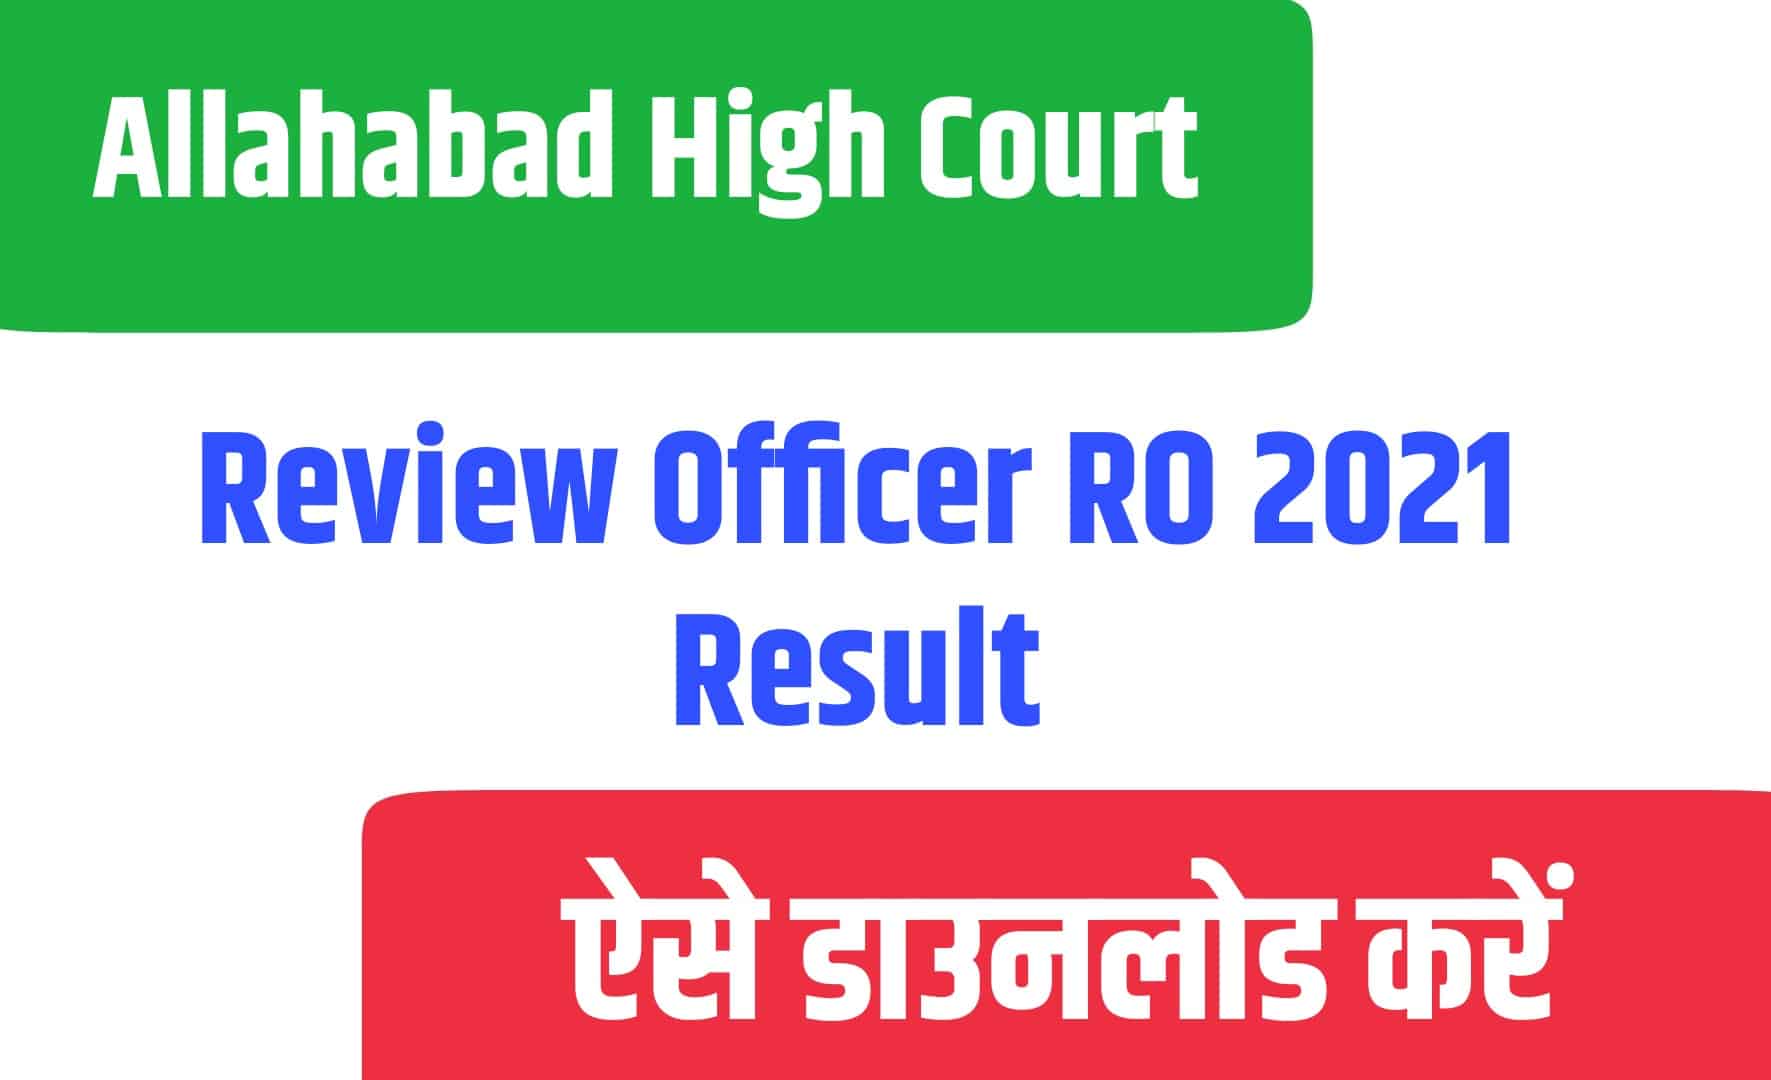 Allahabad High Court Review Officer RO 2021 Result